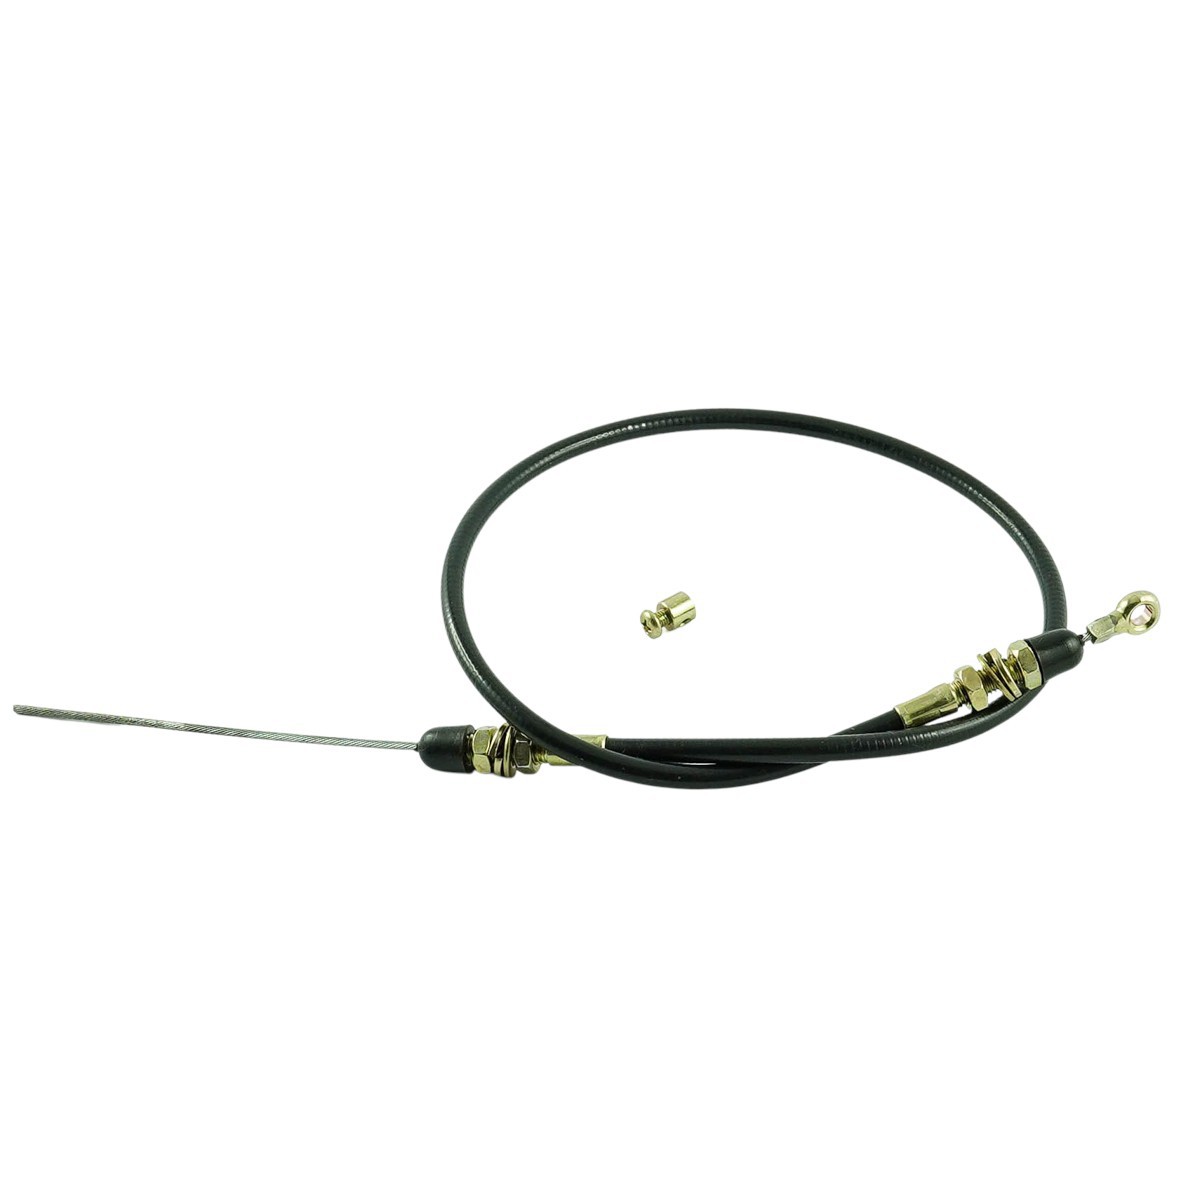 Foot Gas Cable / TRG100 / Ls Tractor no. 40007743